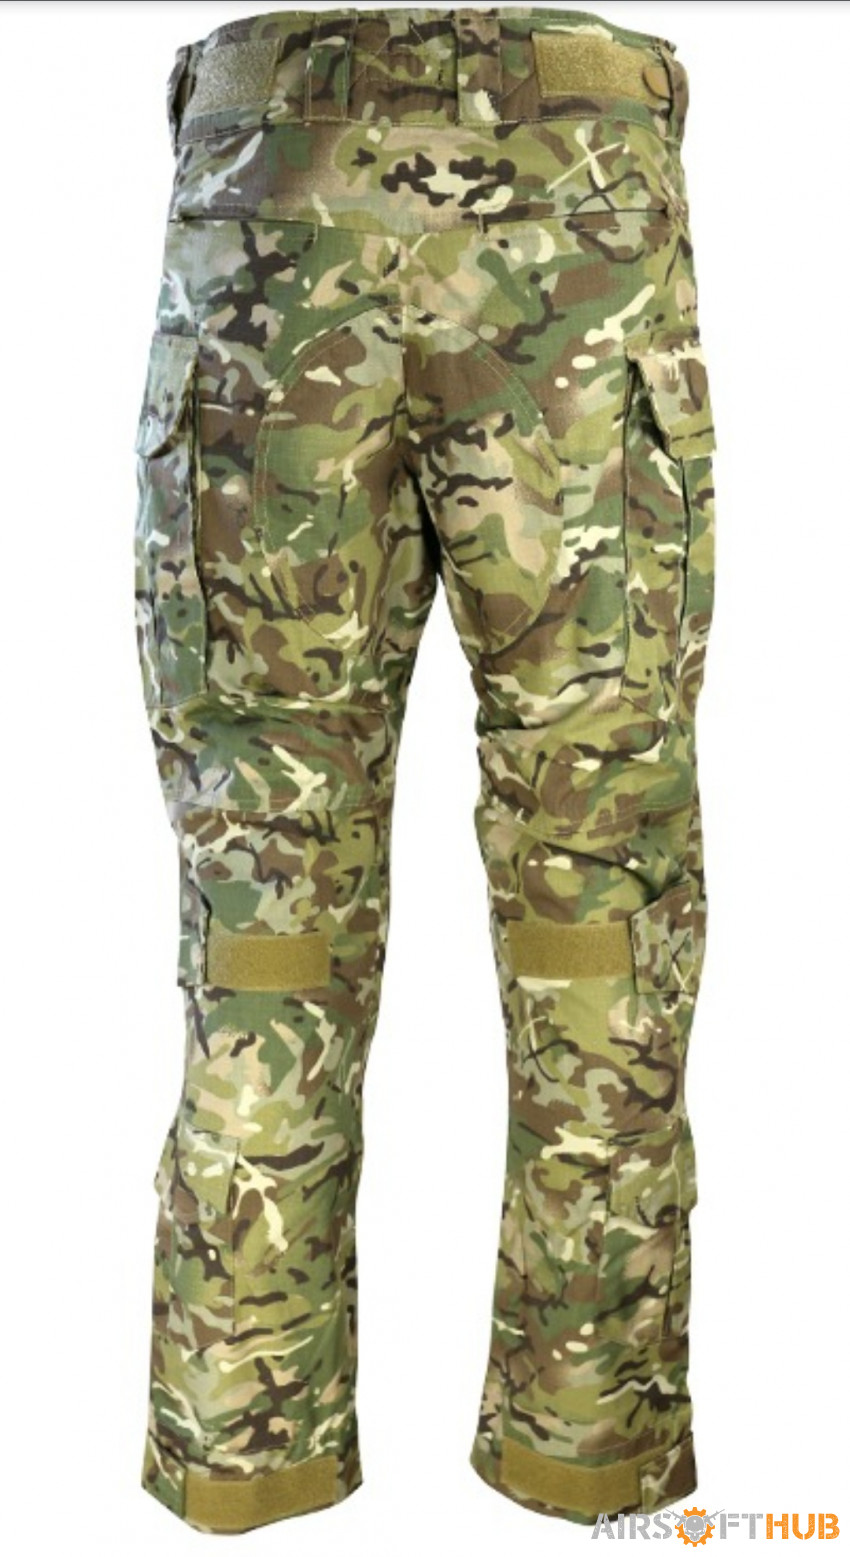 BTP Spec Ops Trousers Knee Pad - Used airsoft equipment